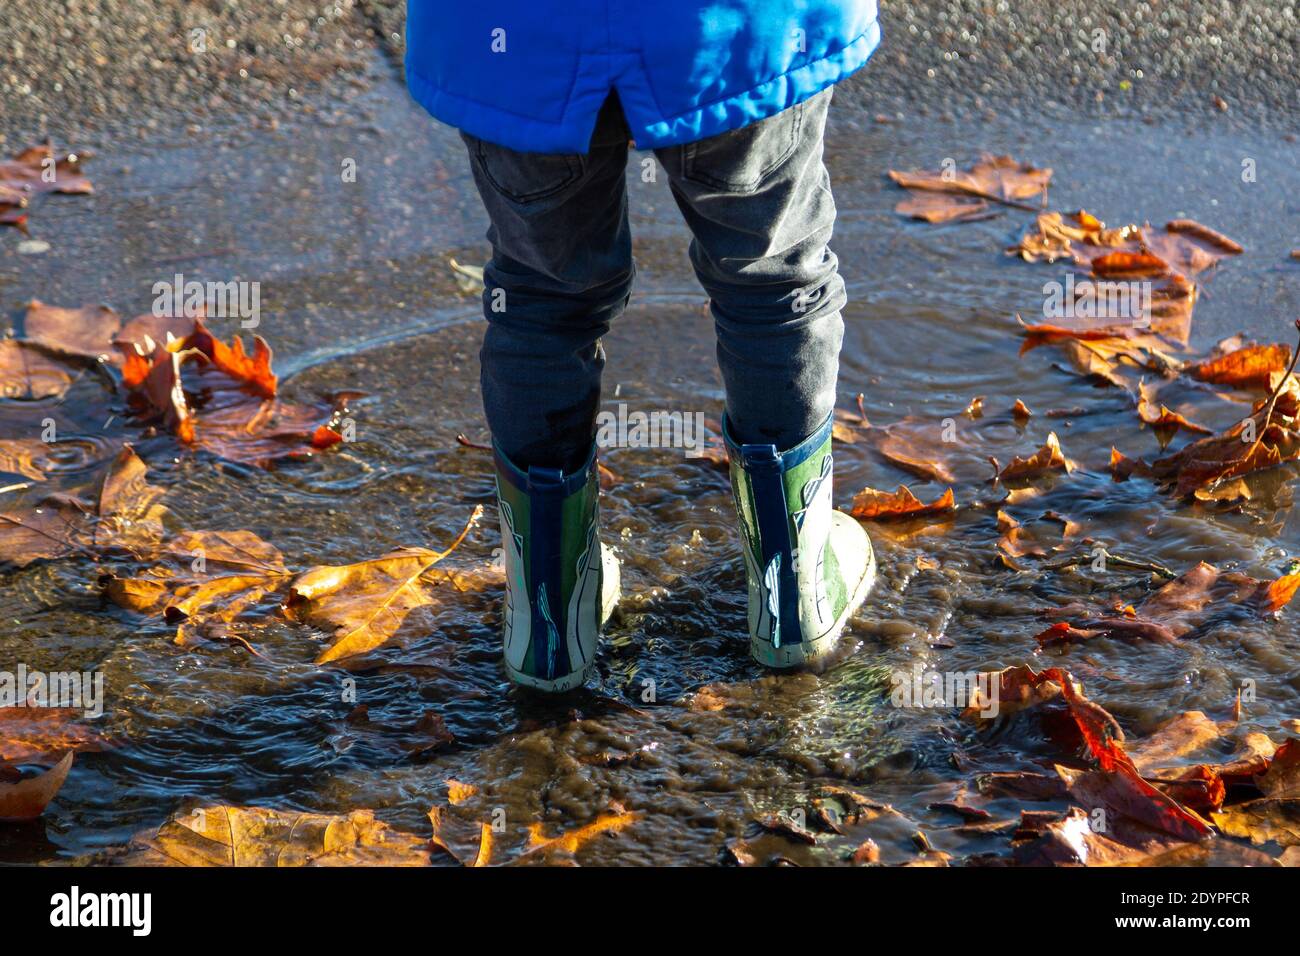 the legs of a child wearing wellies jumping in puddles splashing Stock Photo